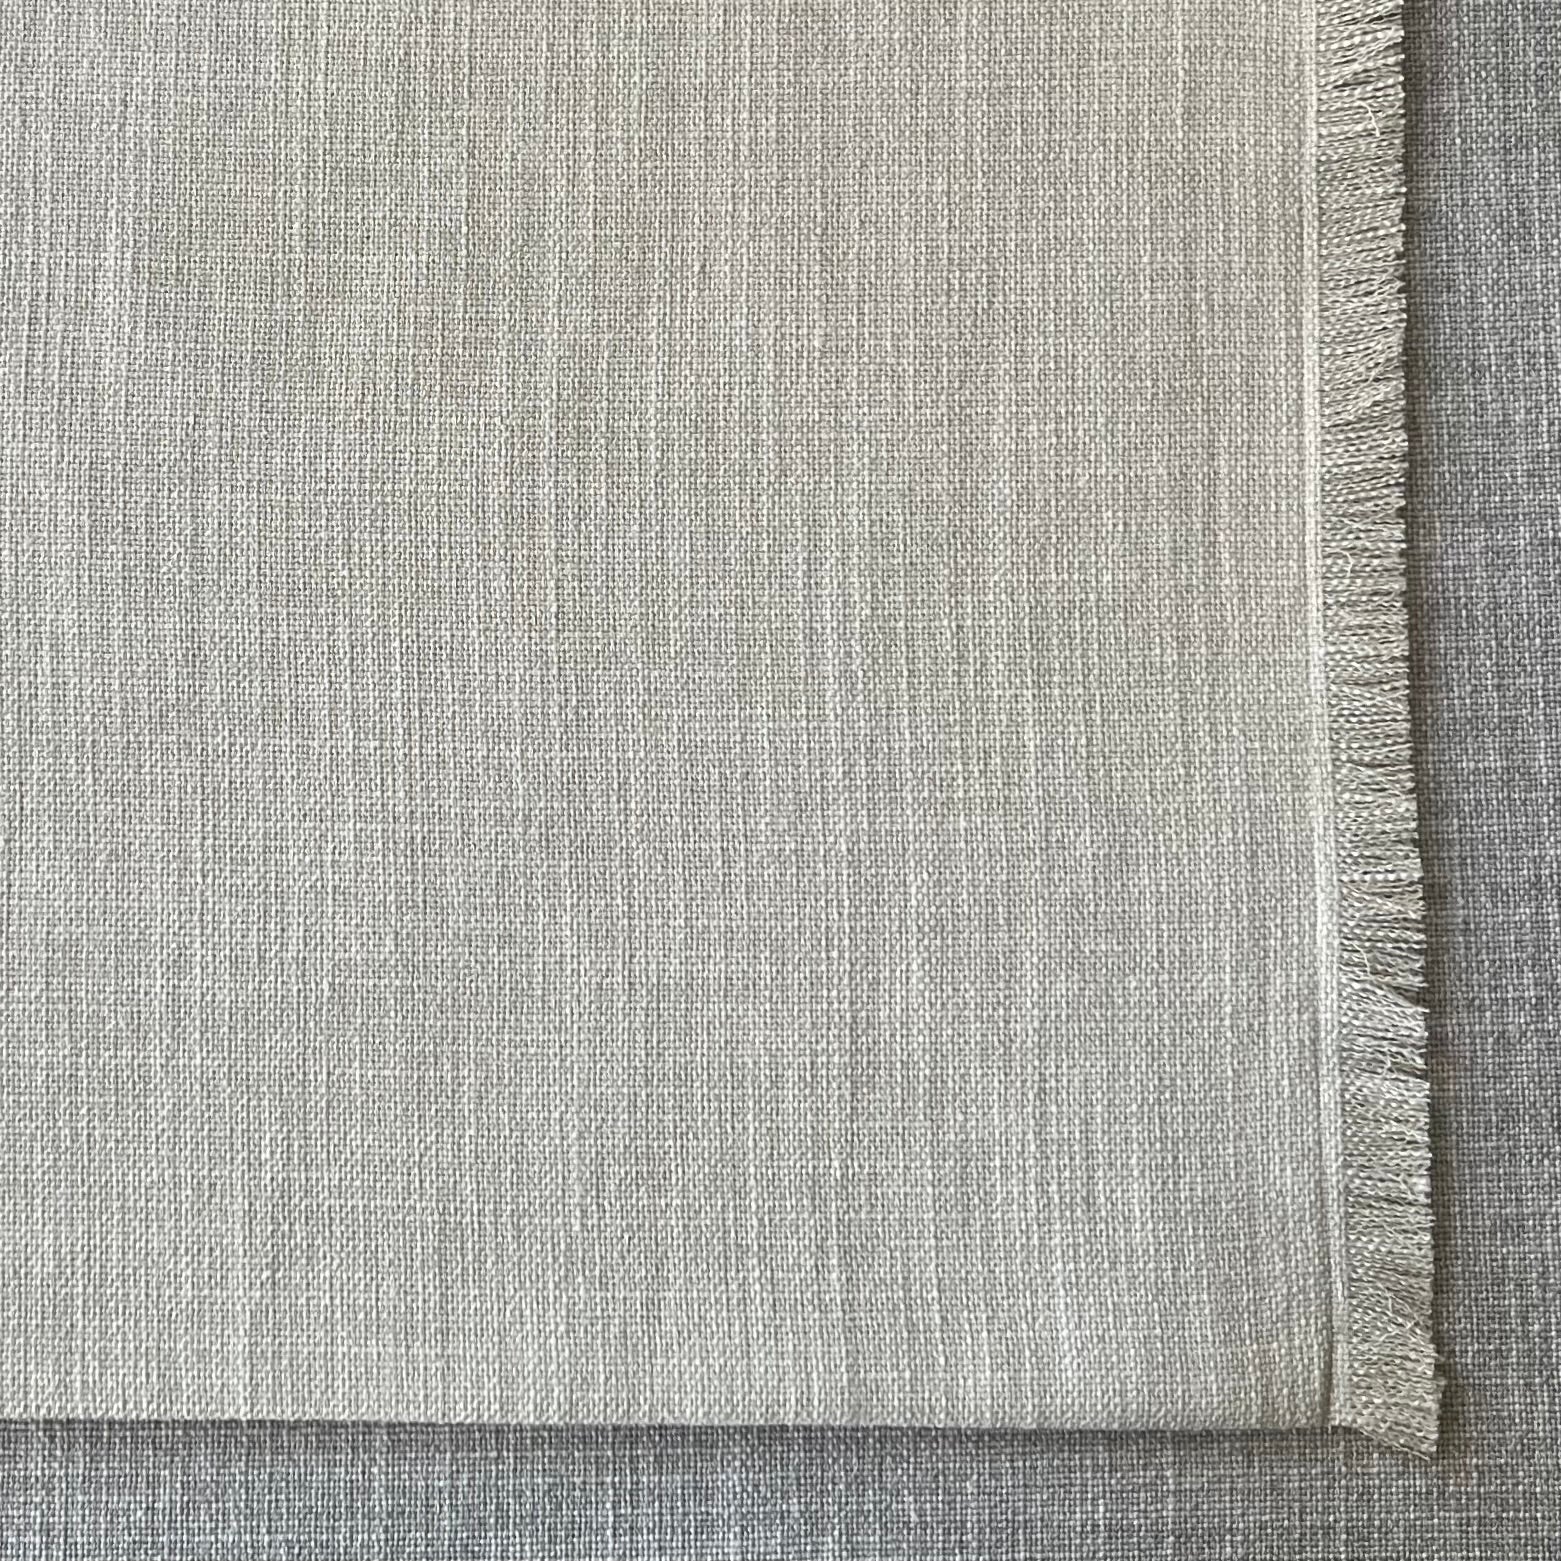 Nomad Heathered Placemat - Oyster